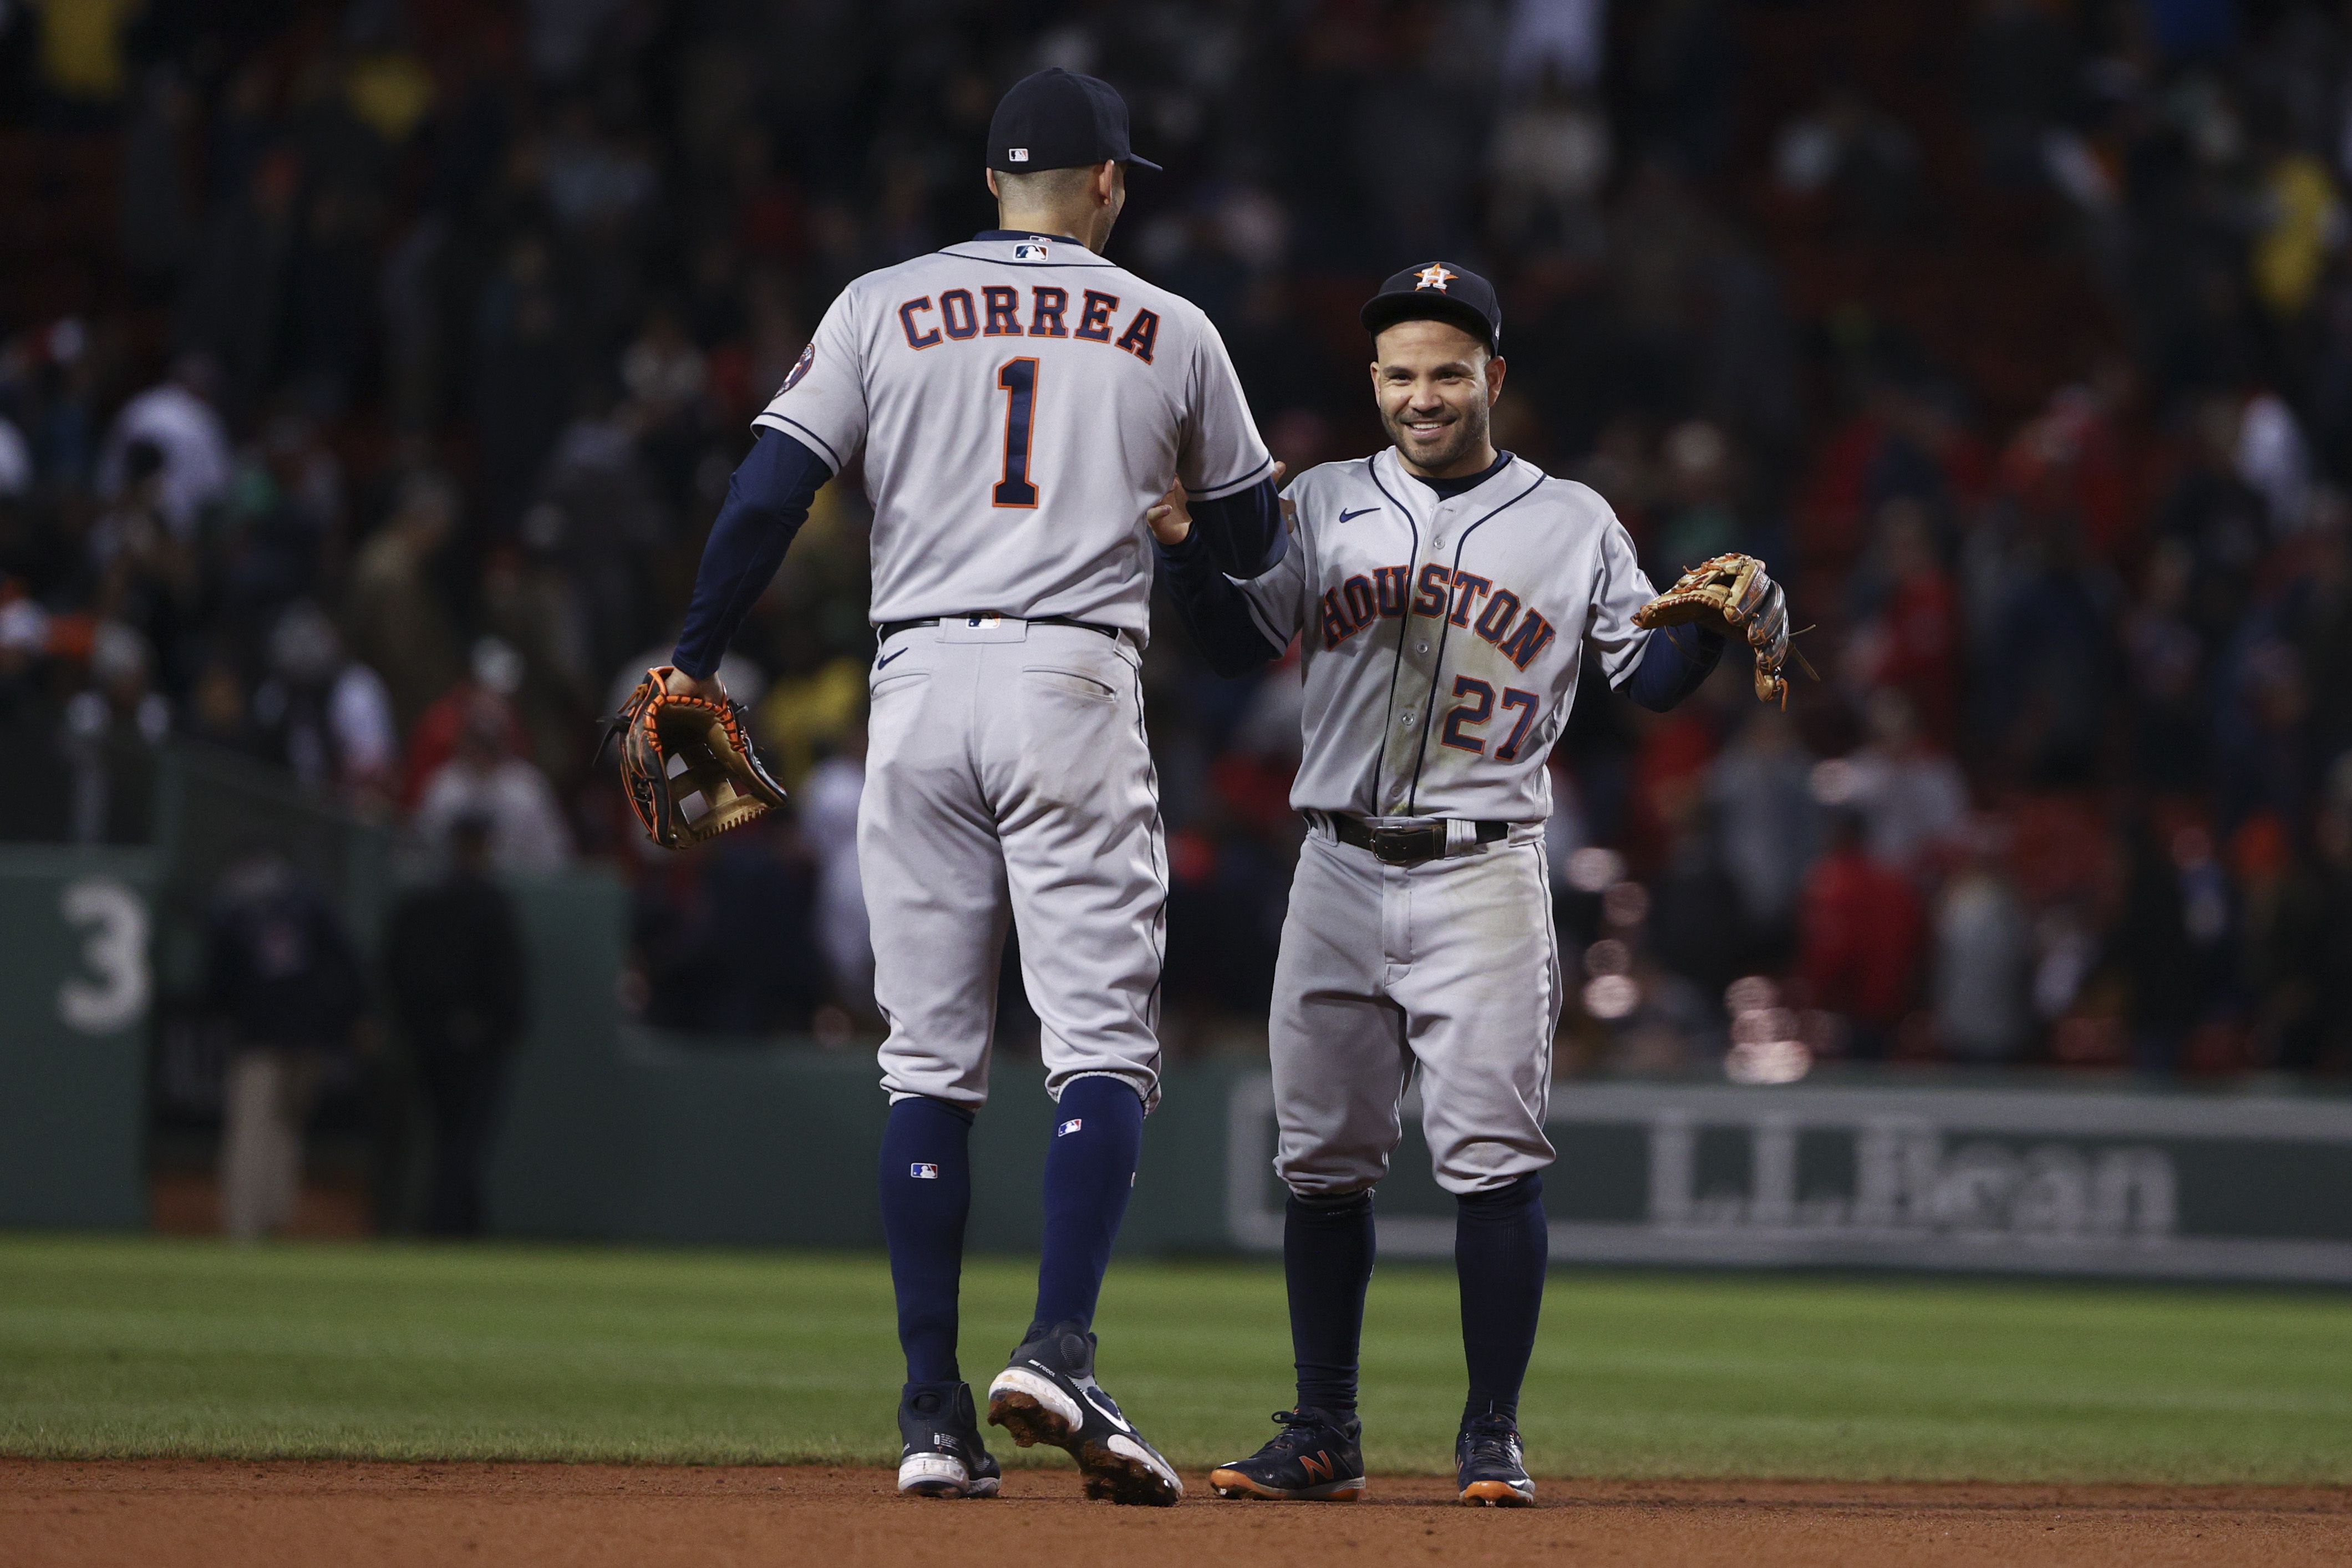 If the Astros have been overlooked this season, the return of Alvarez and  Altuve could change that – News-Herald